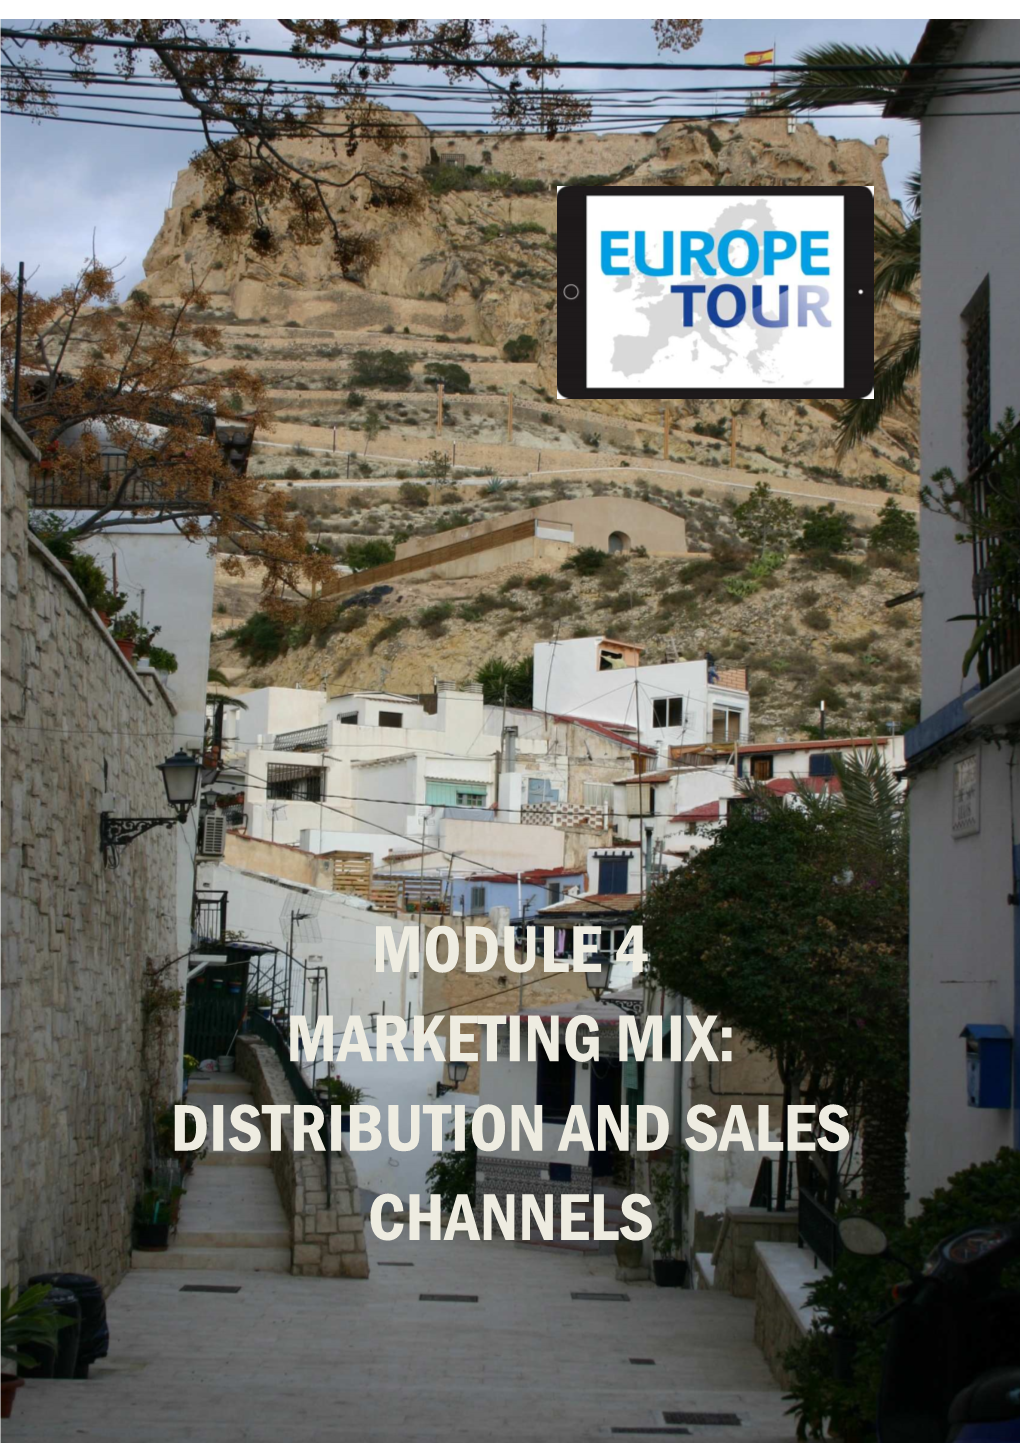 Module 4 Marketing Mix: Distribution and Sales Channels